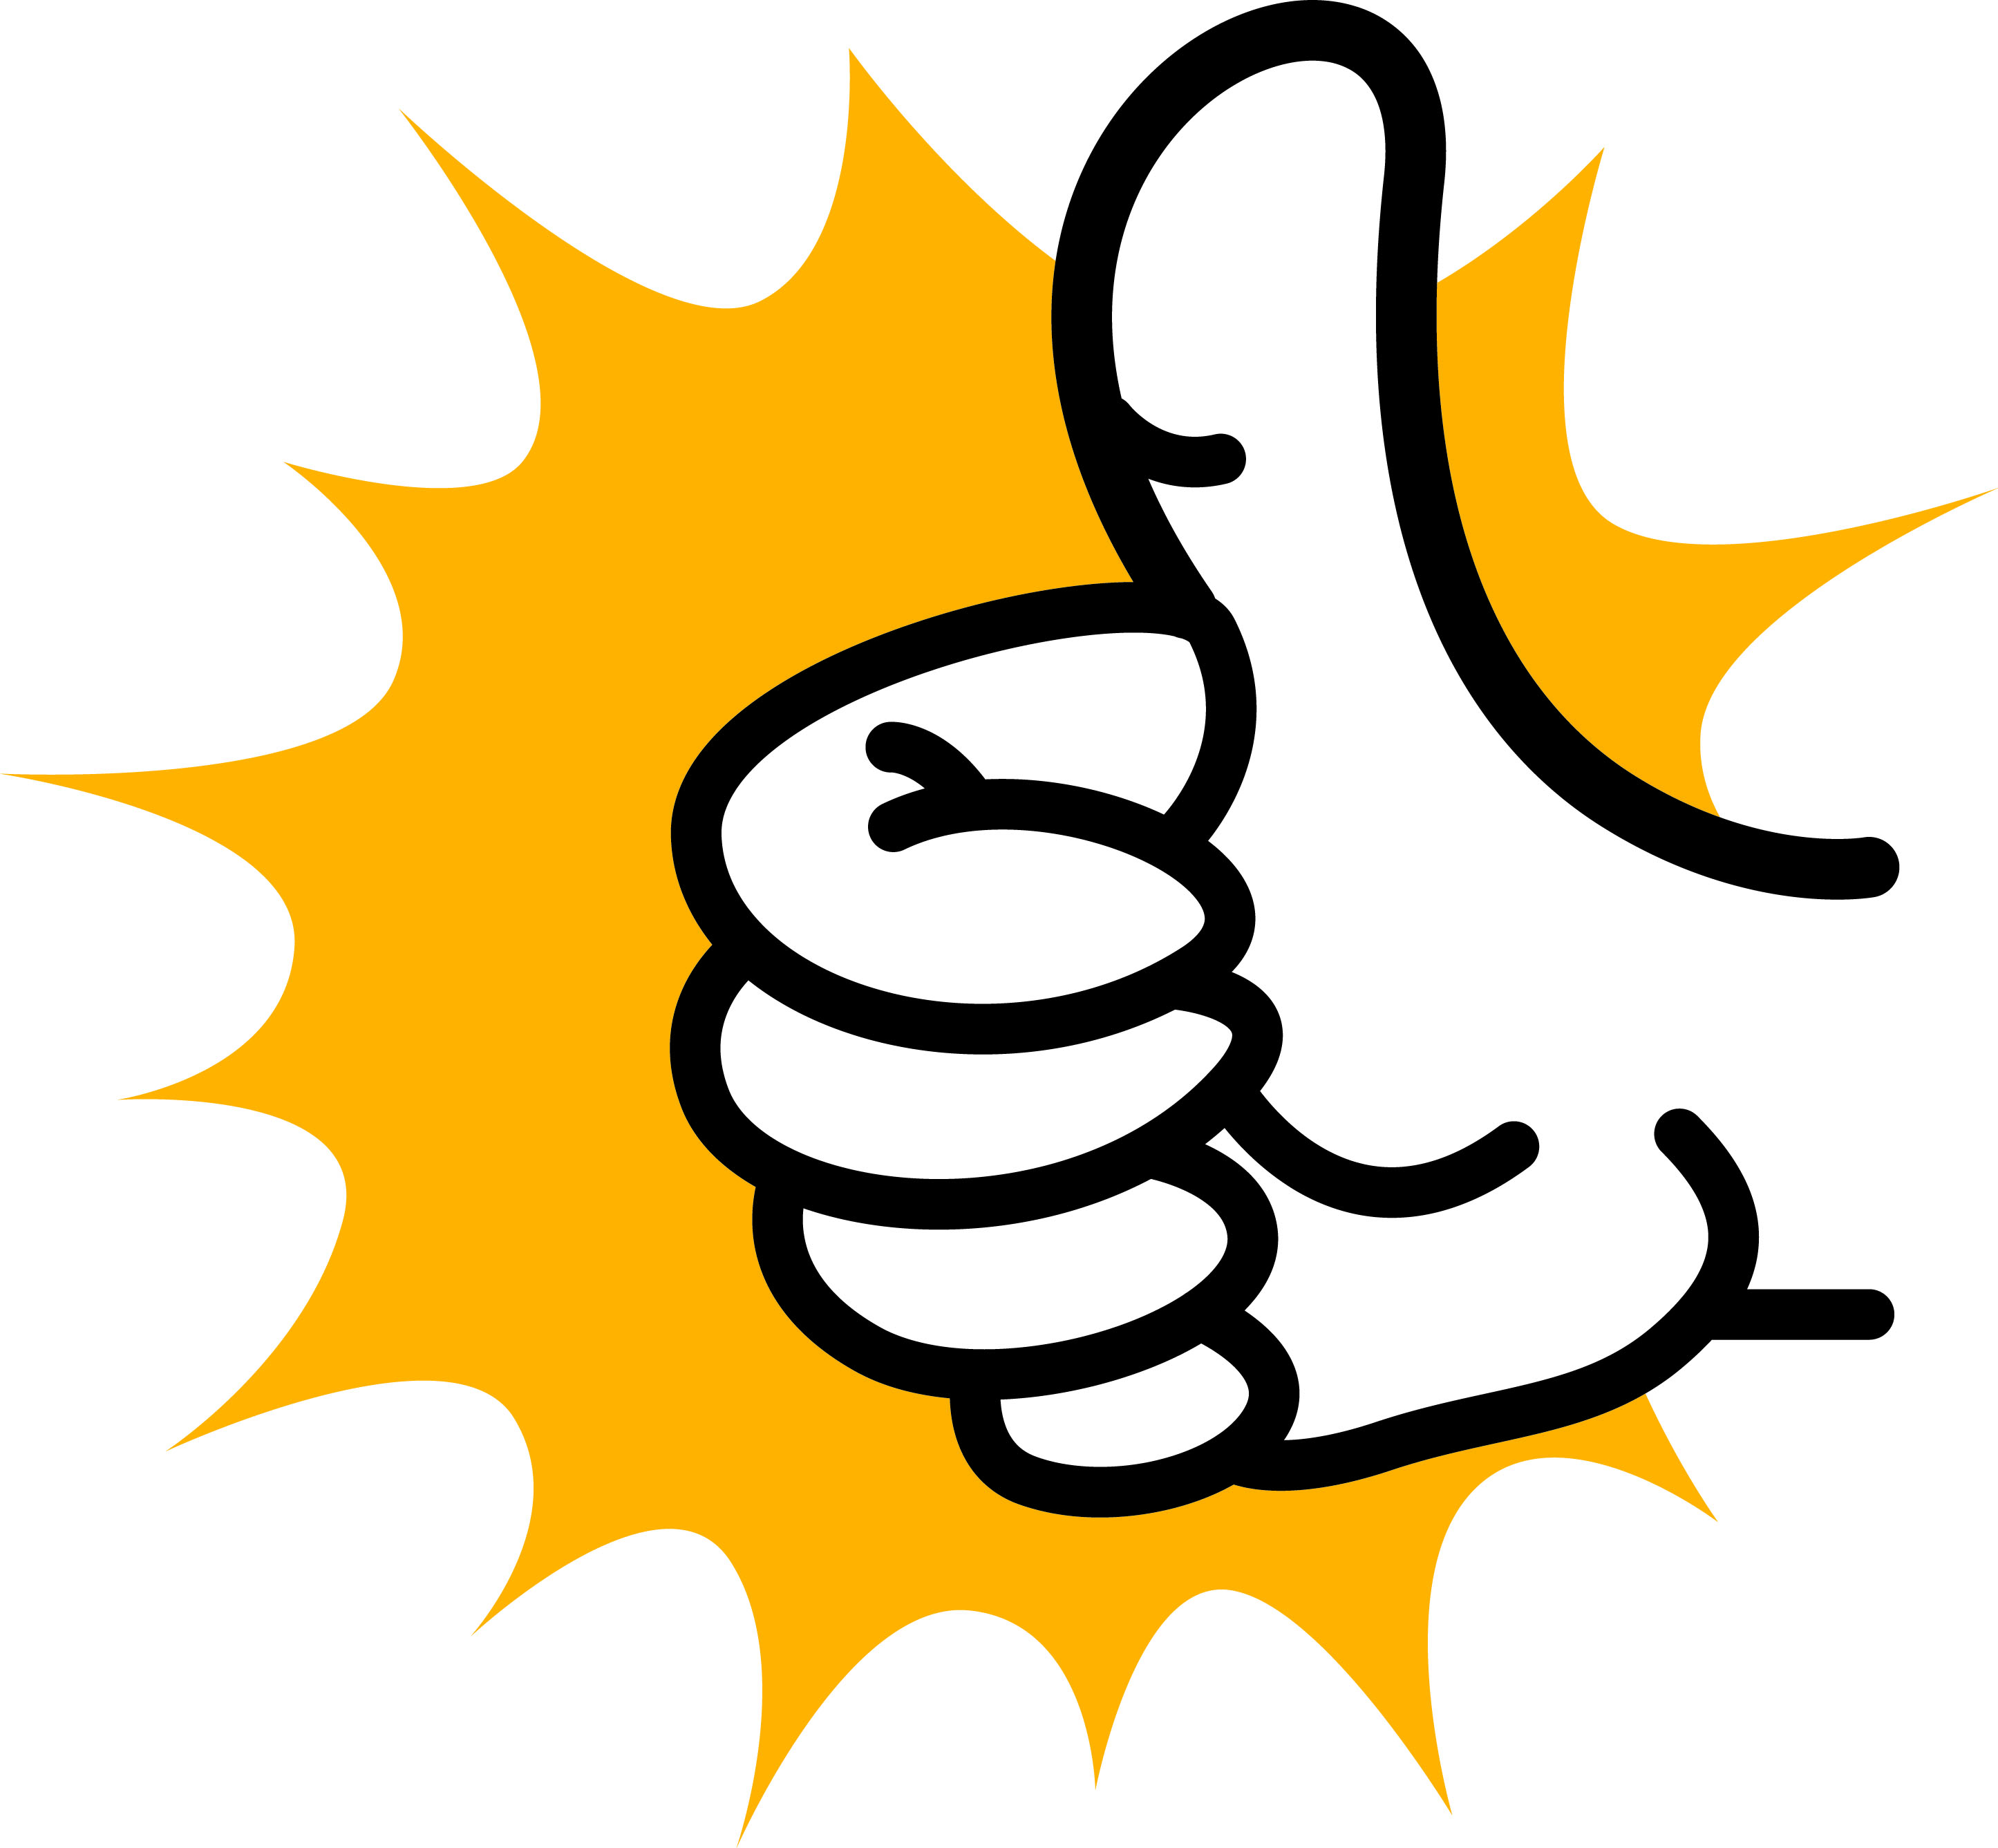 Thumbs Up Images - Clipart library